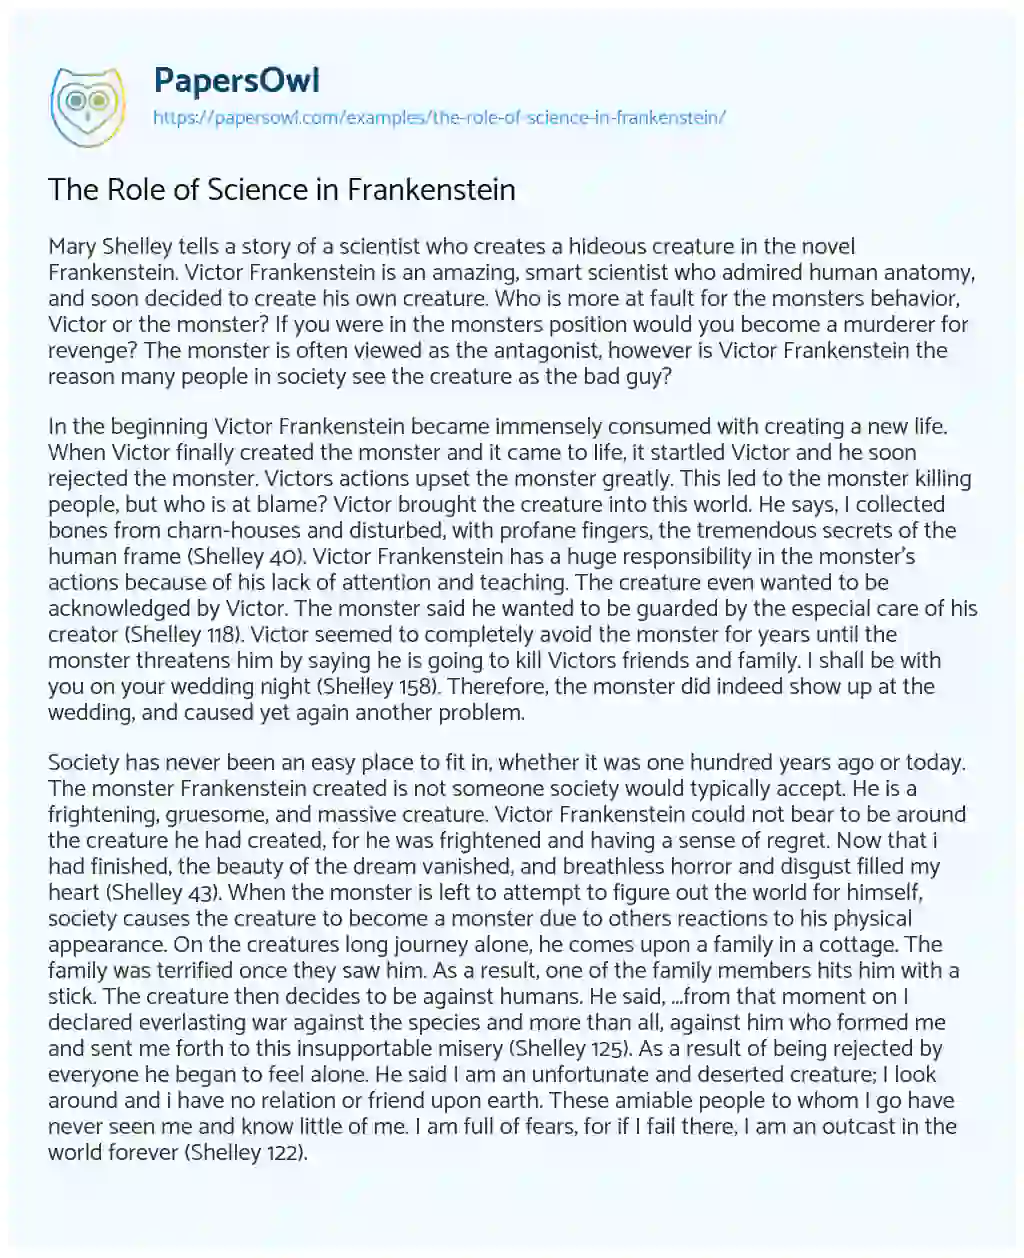 Essay on The Role of Science in Frankenstein